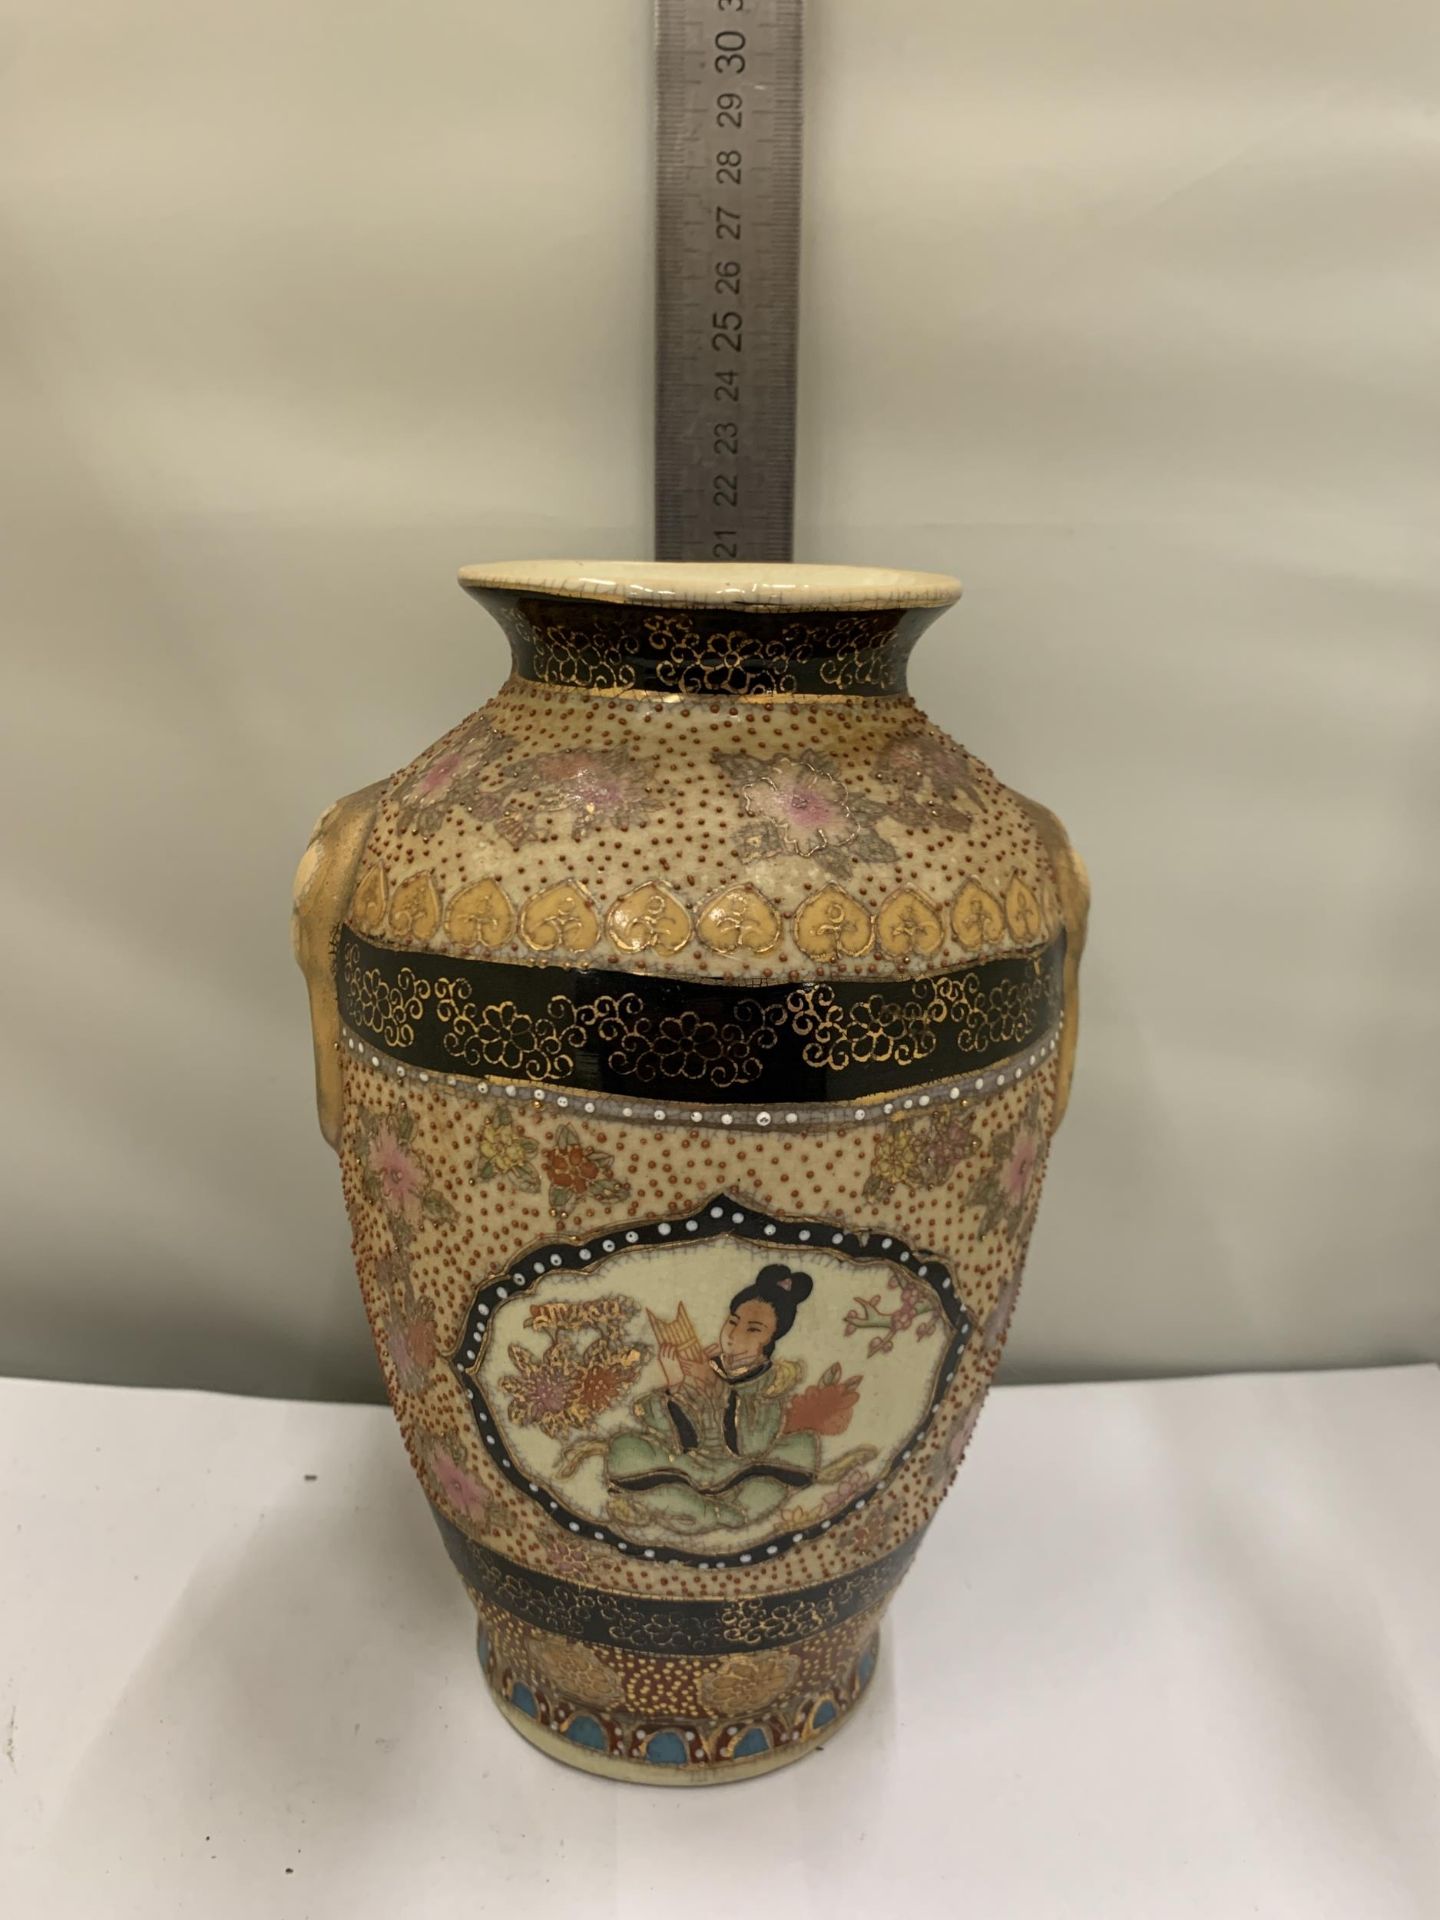 AN ANTIQUE TURKISH OTTOMAN CANAKKALE POTTERY EWER C. 1880 - Image 5 of 5